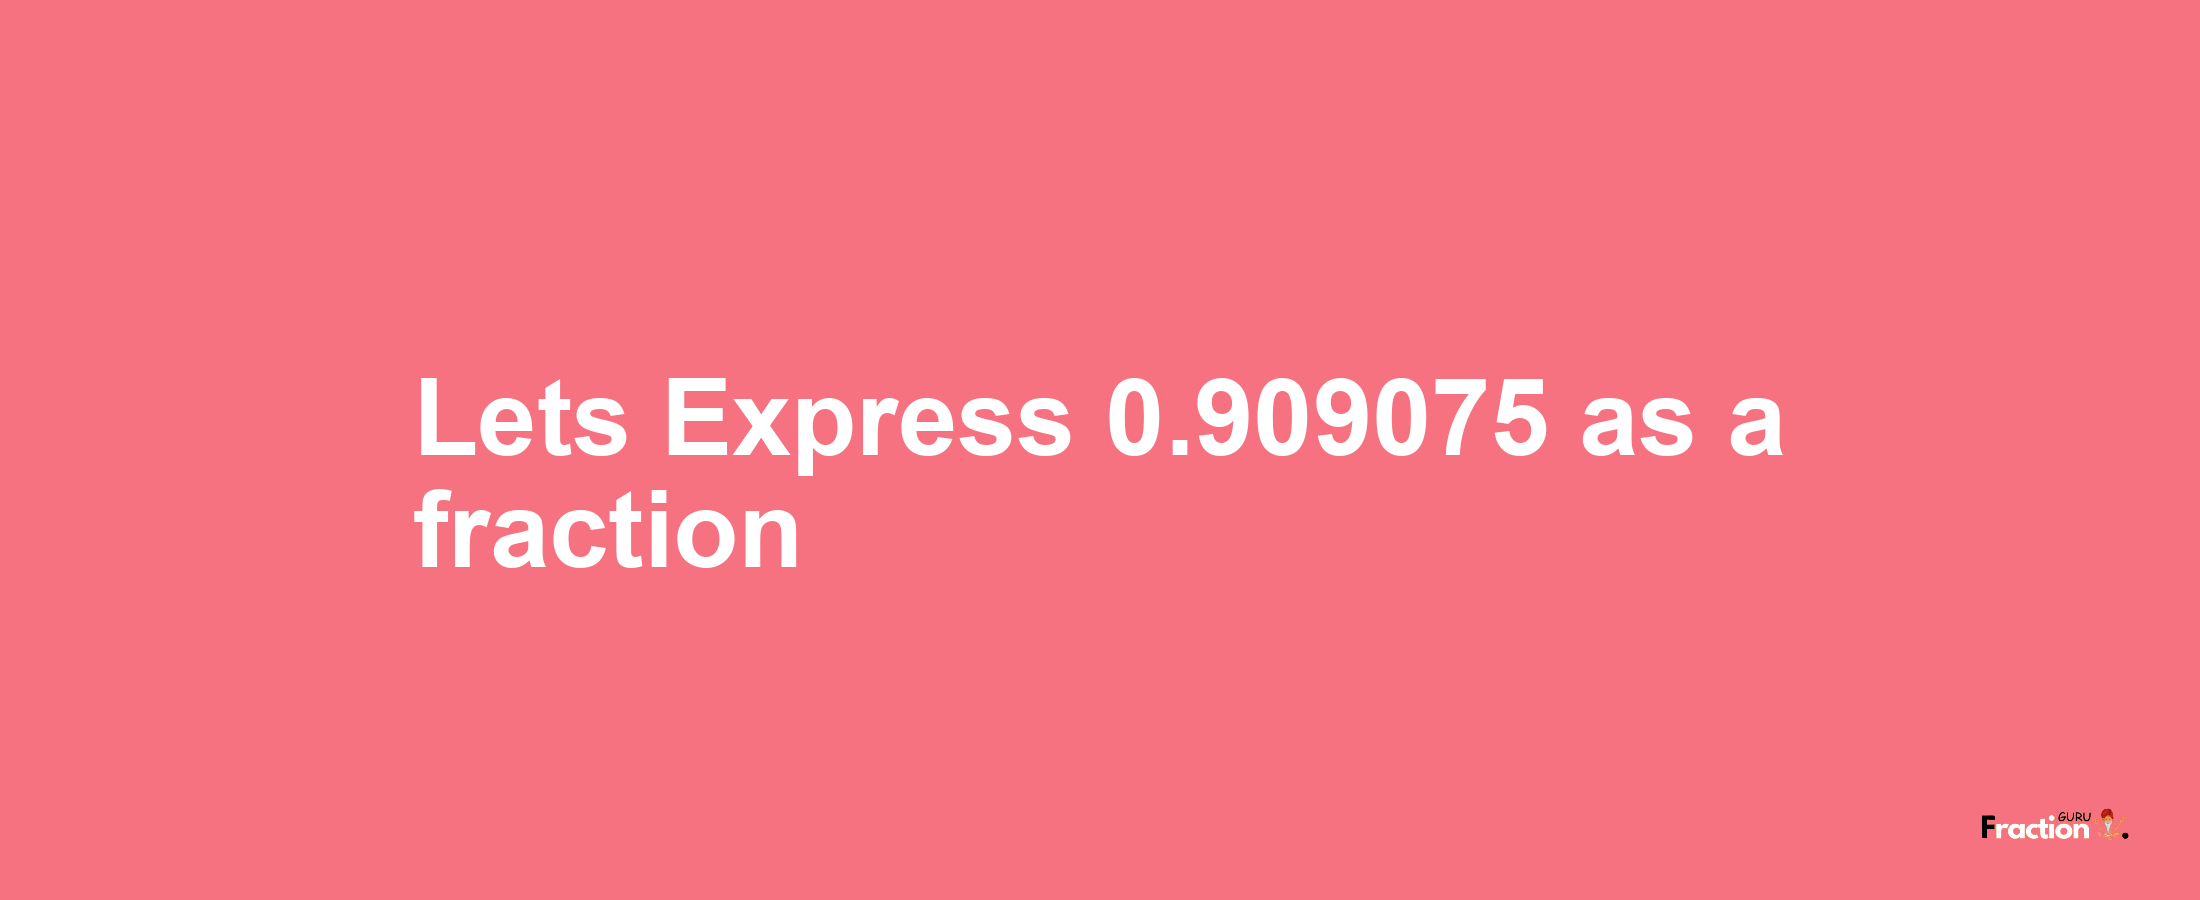 Lets Express 0.909075 as afraction